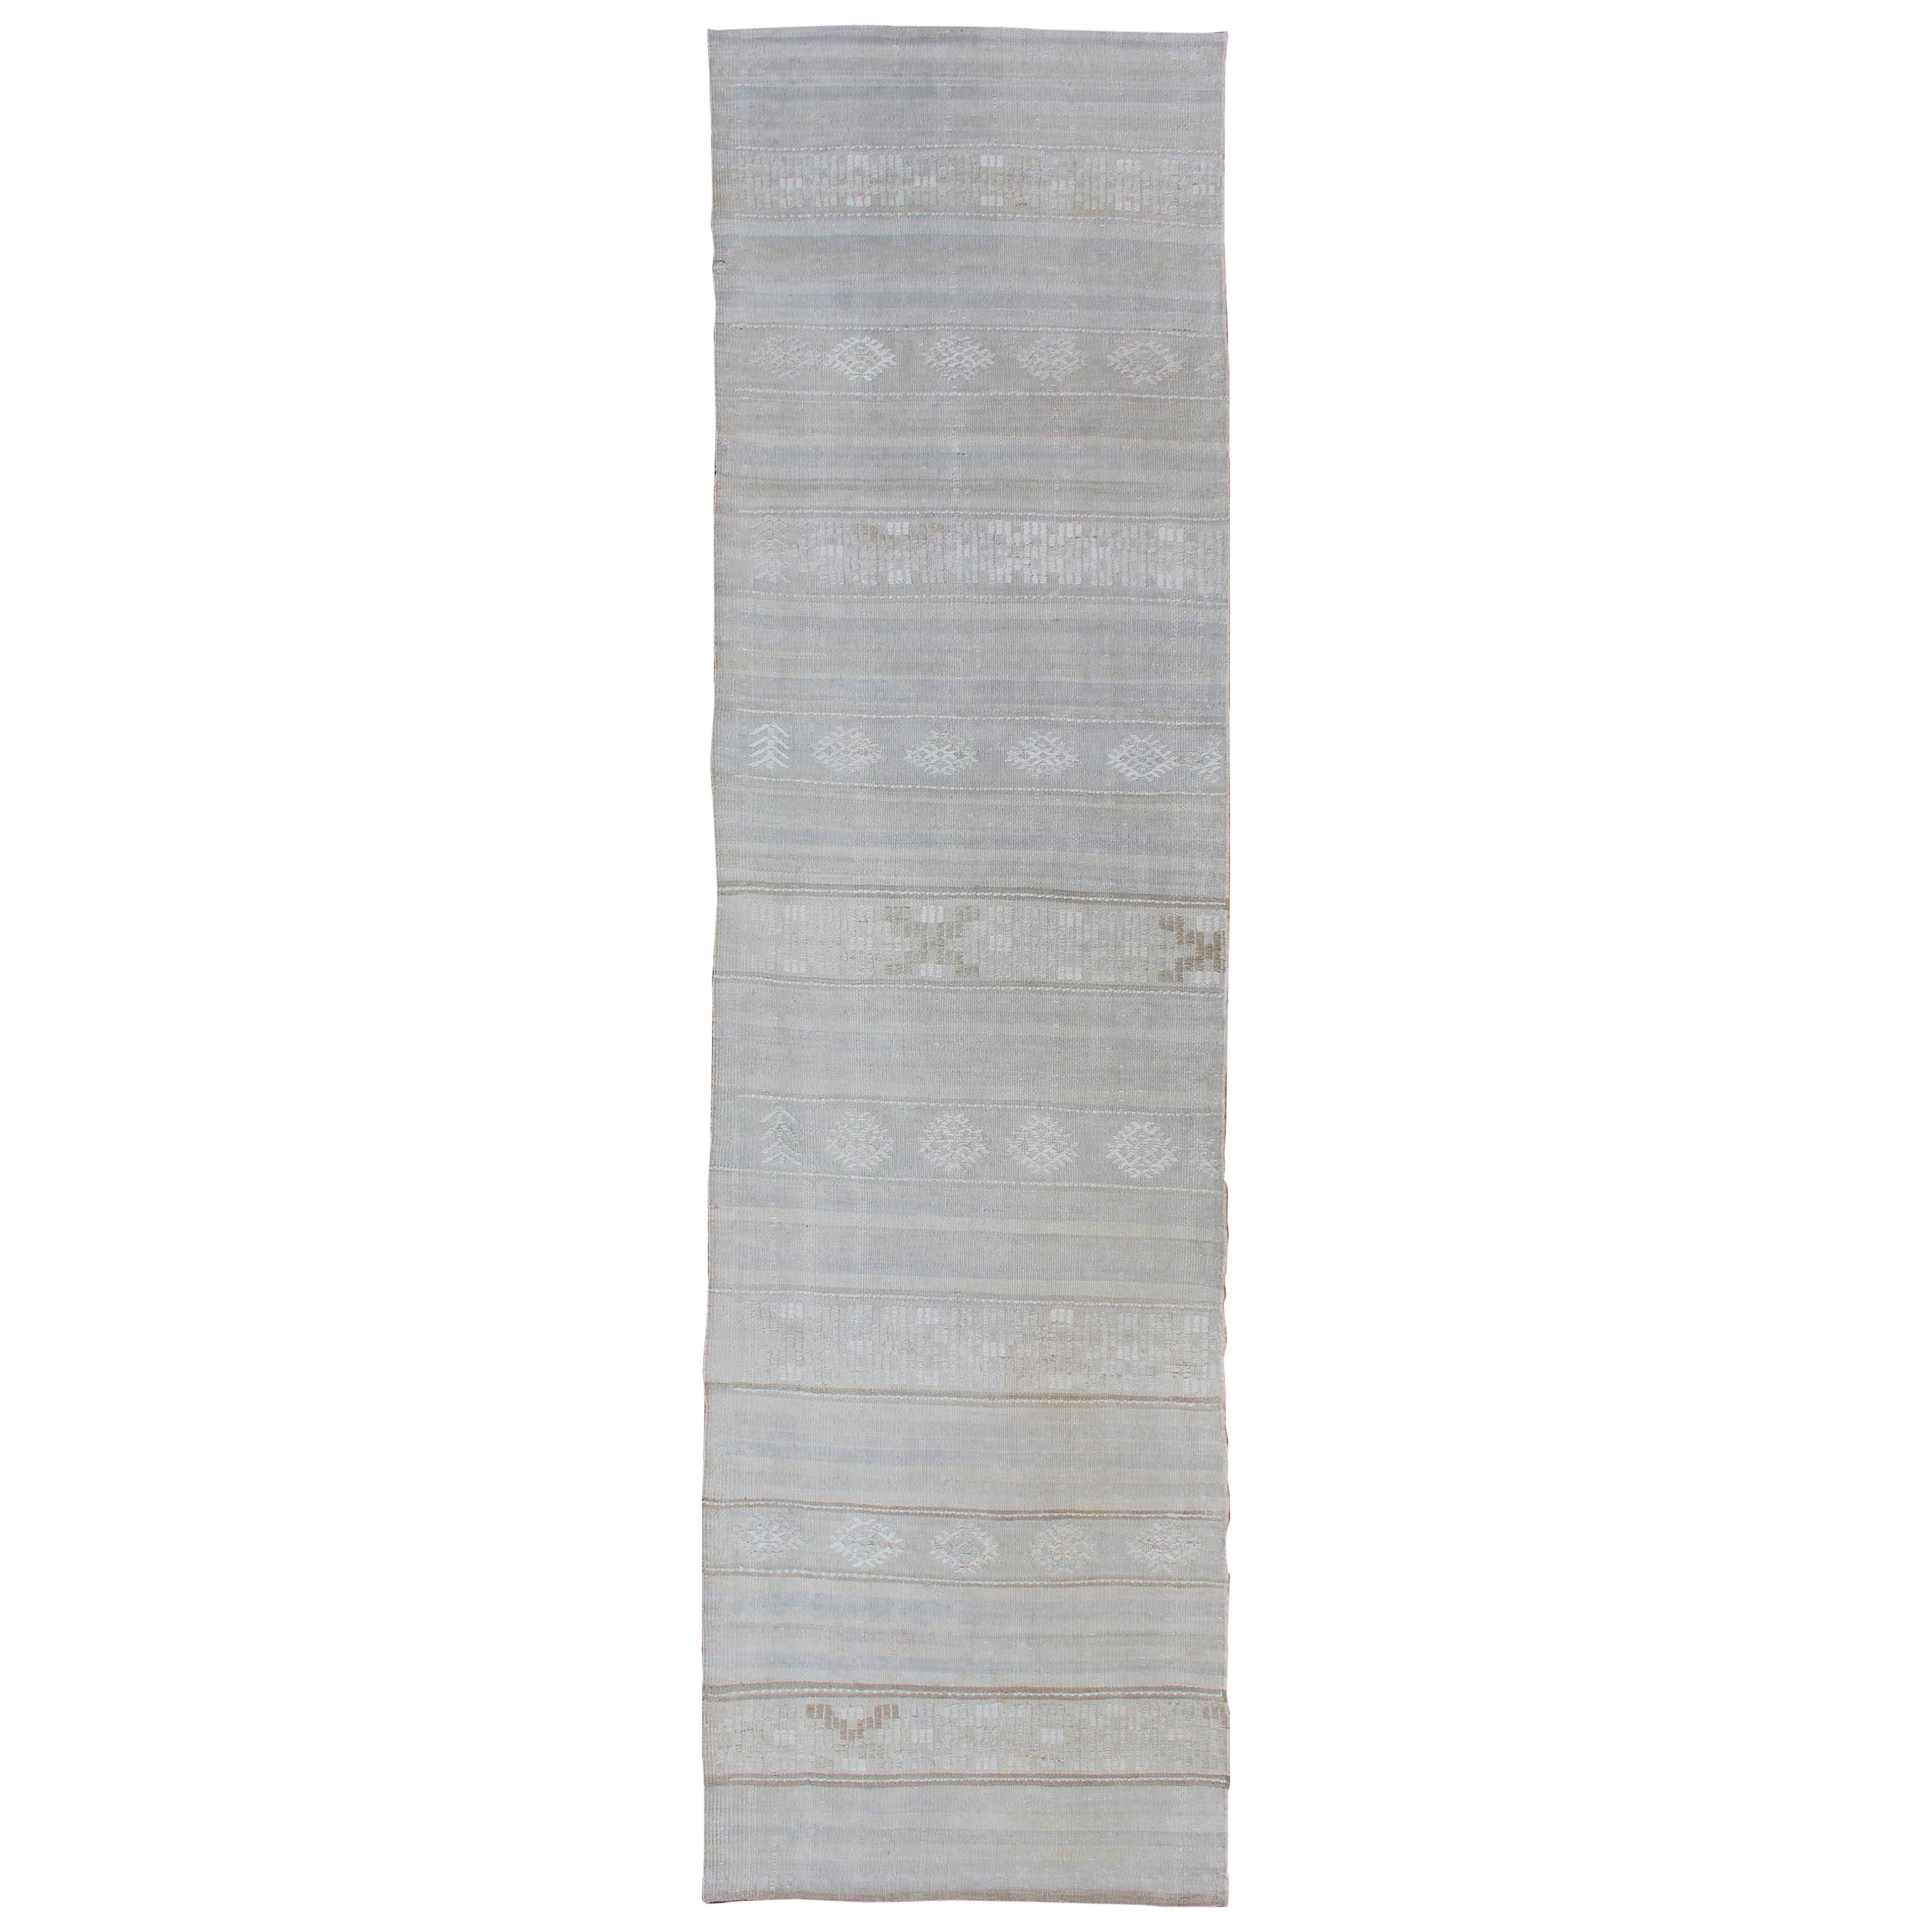 Vintage Turkish Kilim Runner with Stripes in Light Grey and Muted Tones For Sale